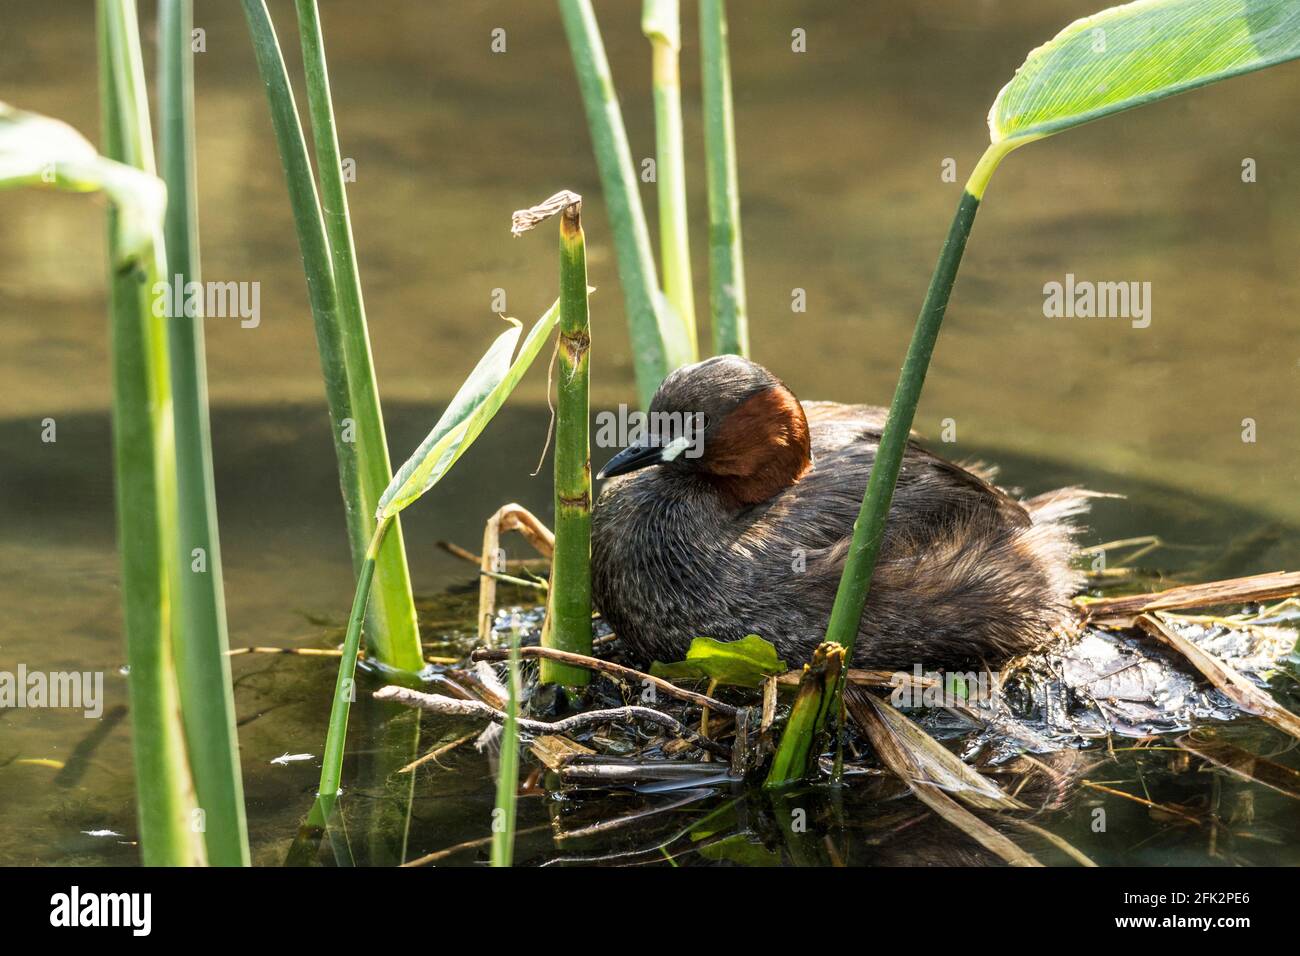 Little Grebe 'Tachybaptus ruficollis' Adult bird on the nest. Incubating eggs.South-west France. Stock Photo